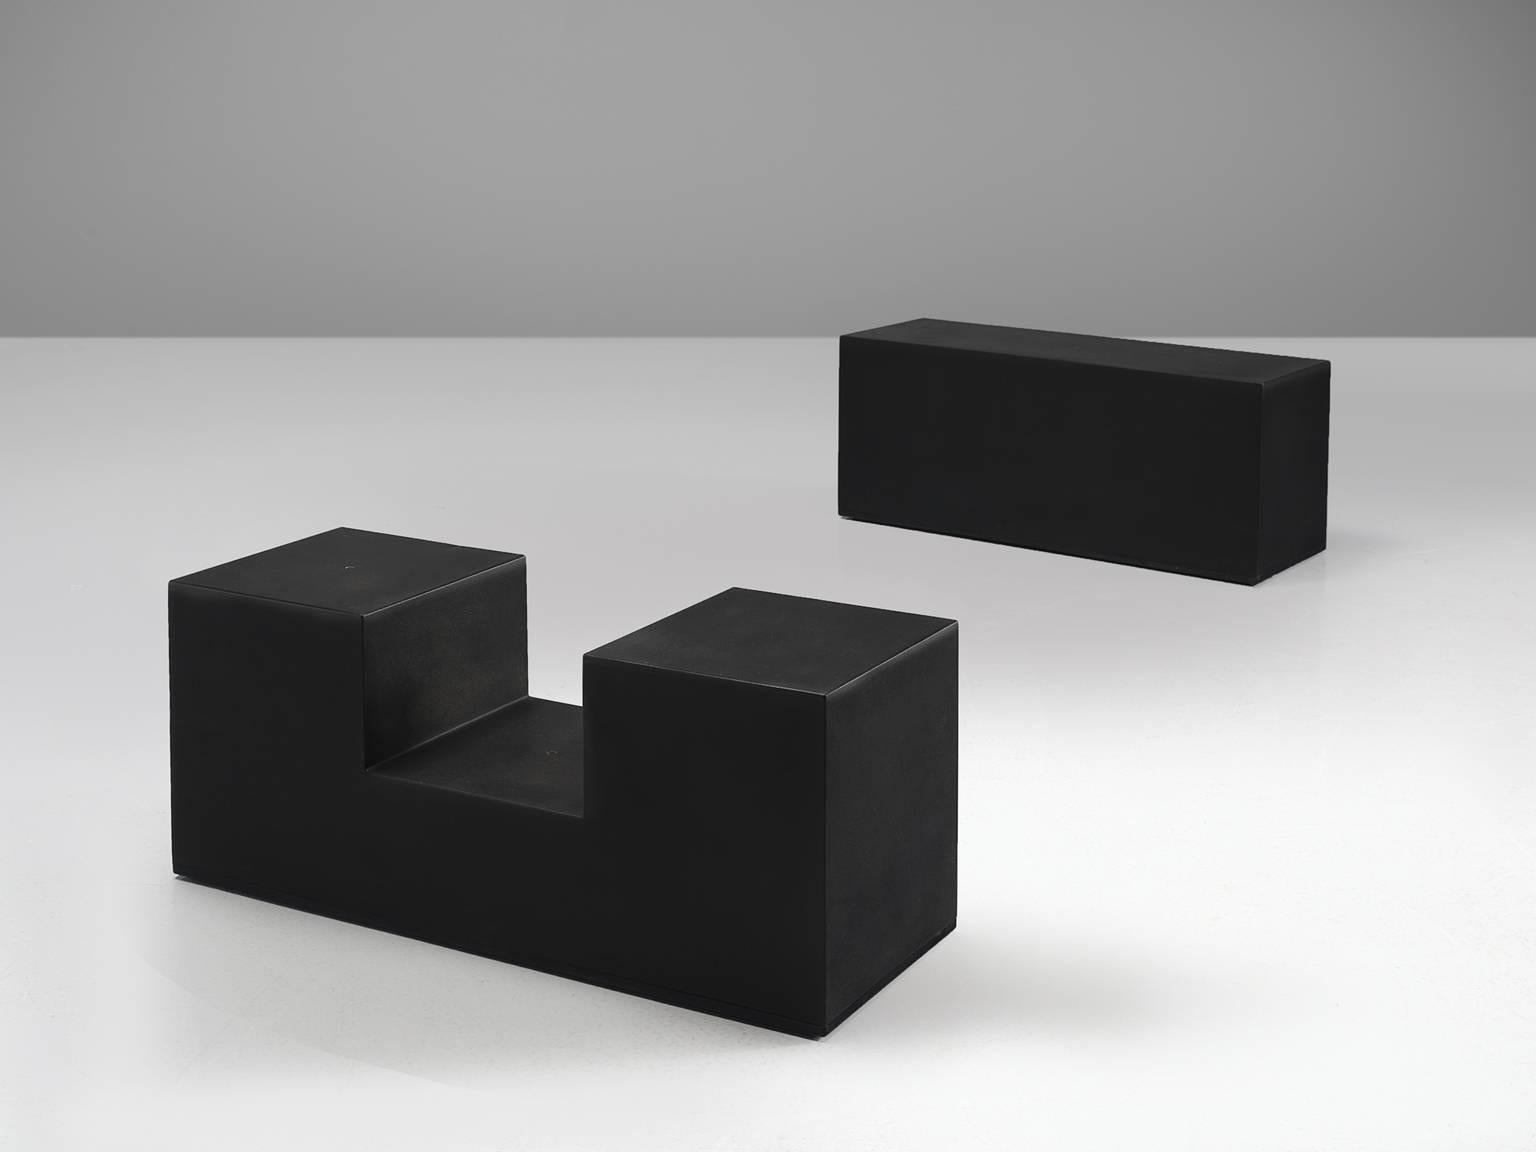 Mario Bellini for B&B Italia, 'Gli Scacchi' element in black polyurethane, Italy, 1971. 

These versatile 'chess' building blocks can be used both as tables or seats. Signed with manufacturer's marks B&B and are made out of self-skinning